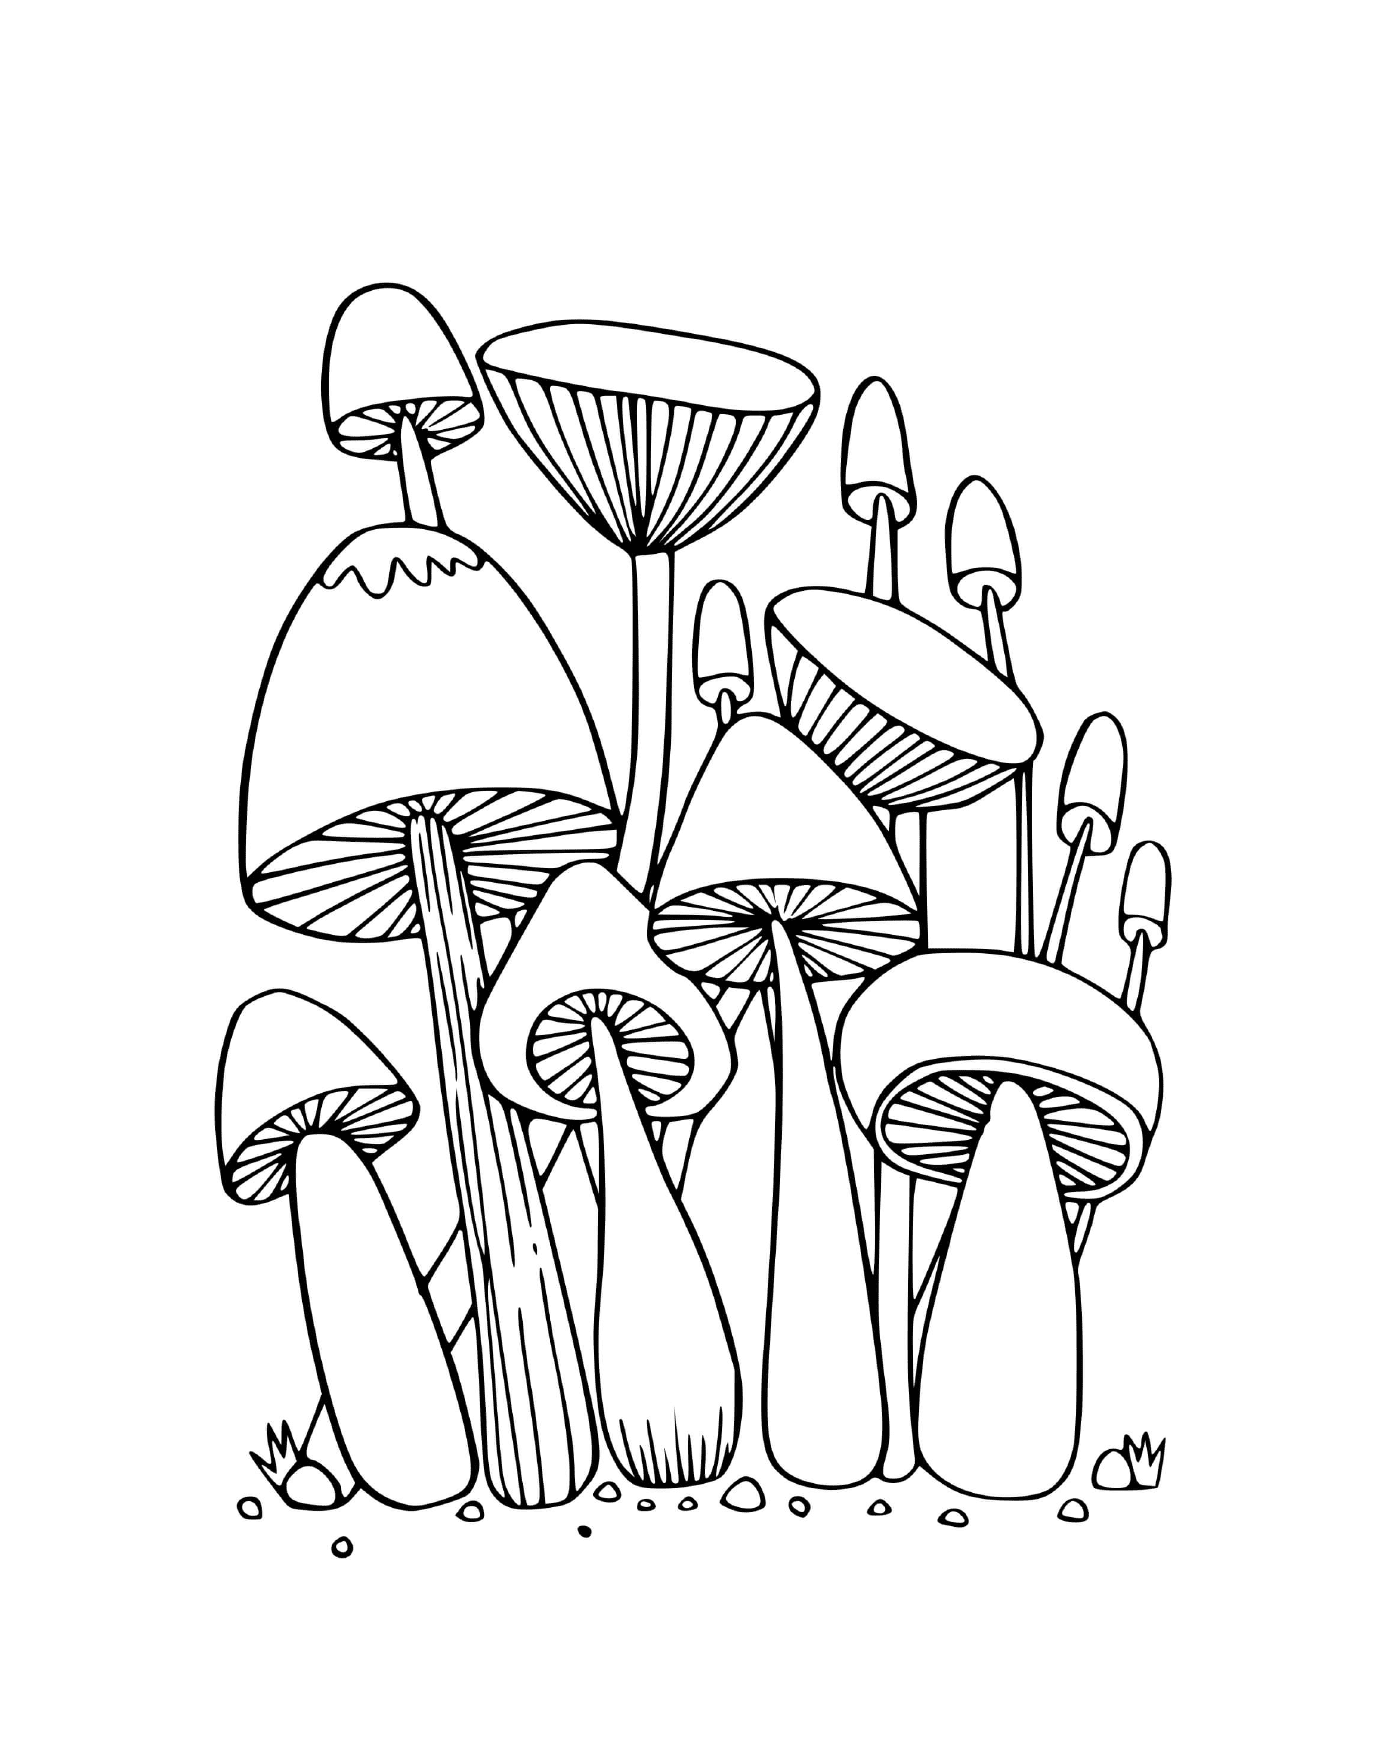  Forest mushrooms sitting in the grass 